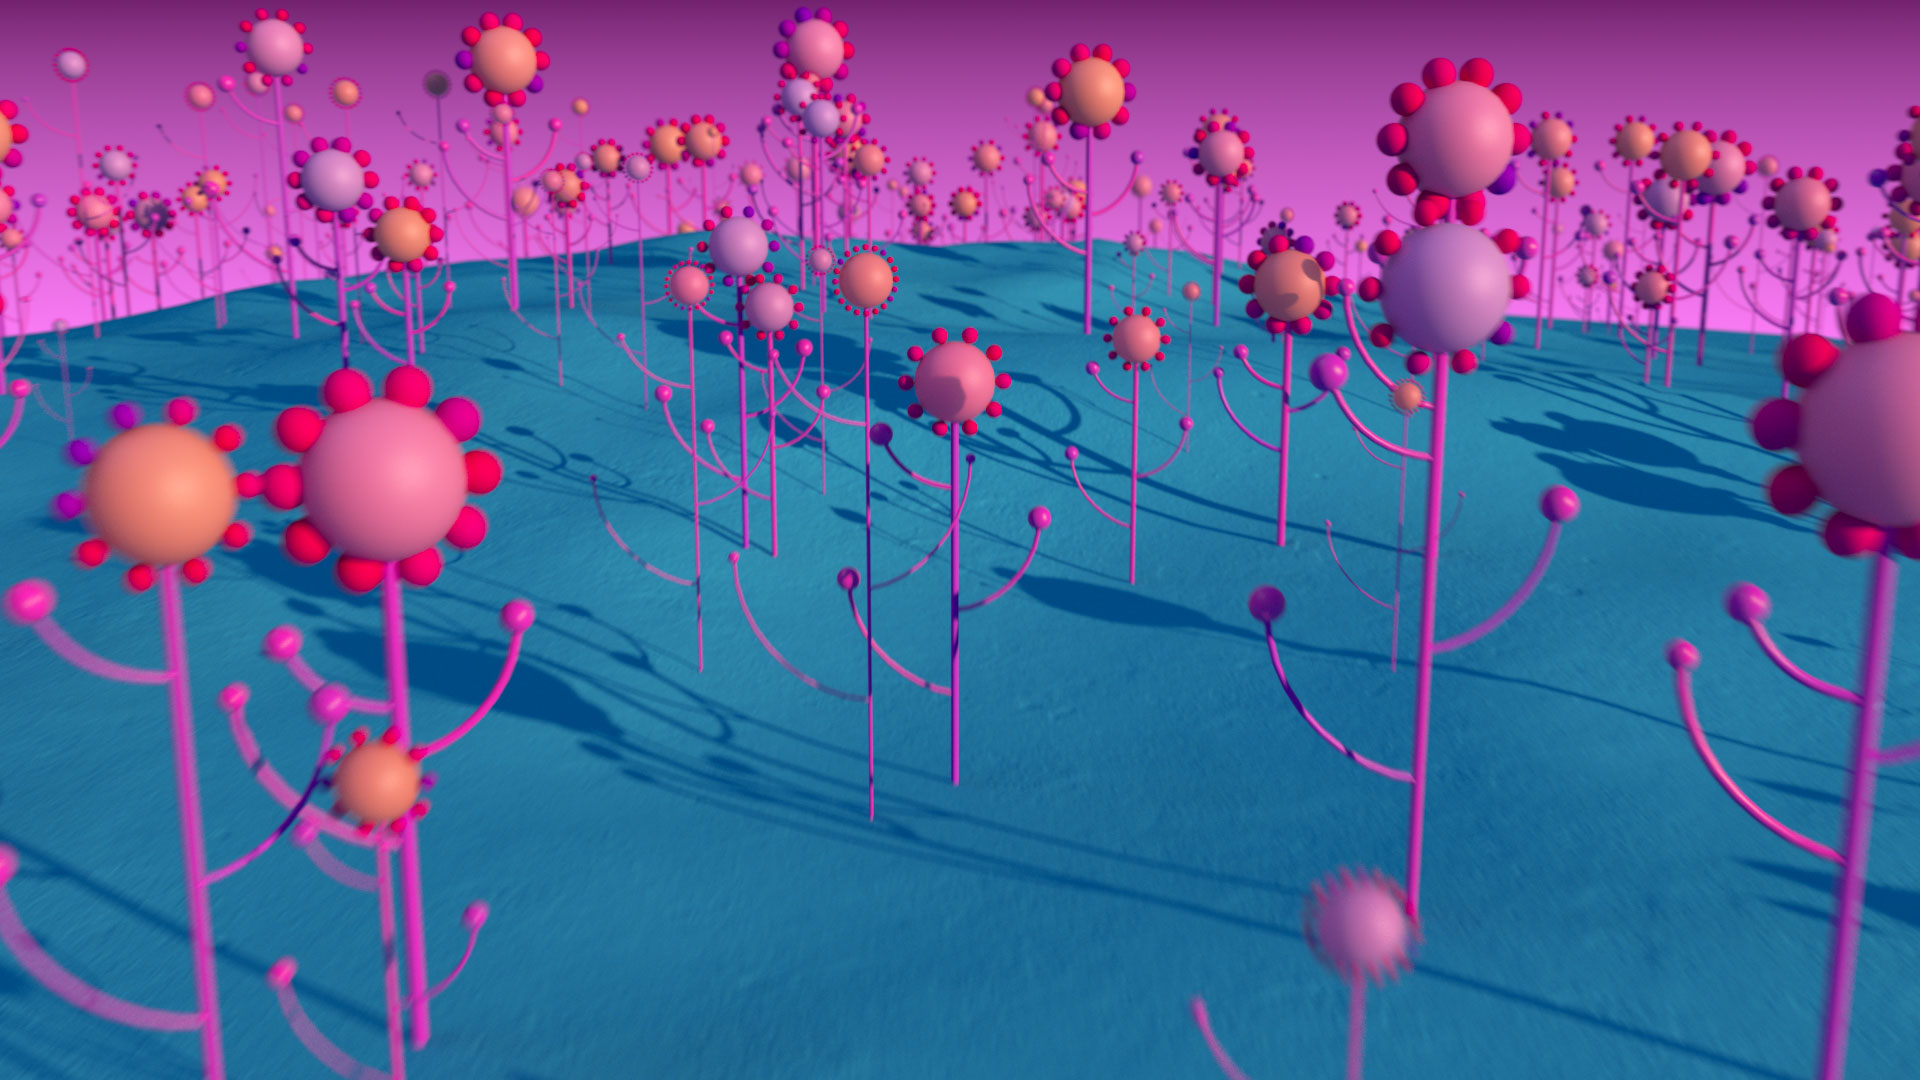 learn. Cinema 4D Fields In One Day with Tim Clapham at helloluxx